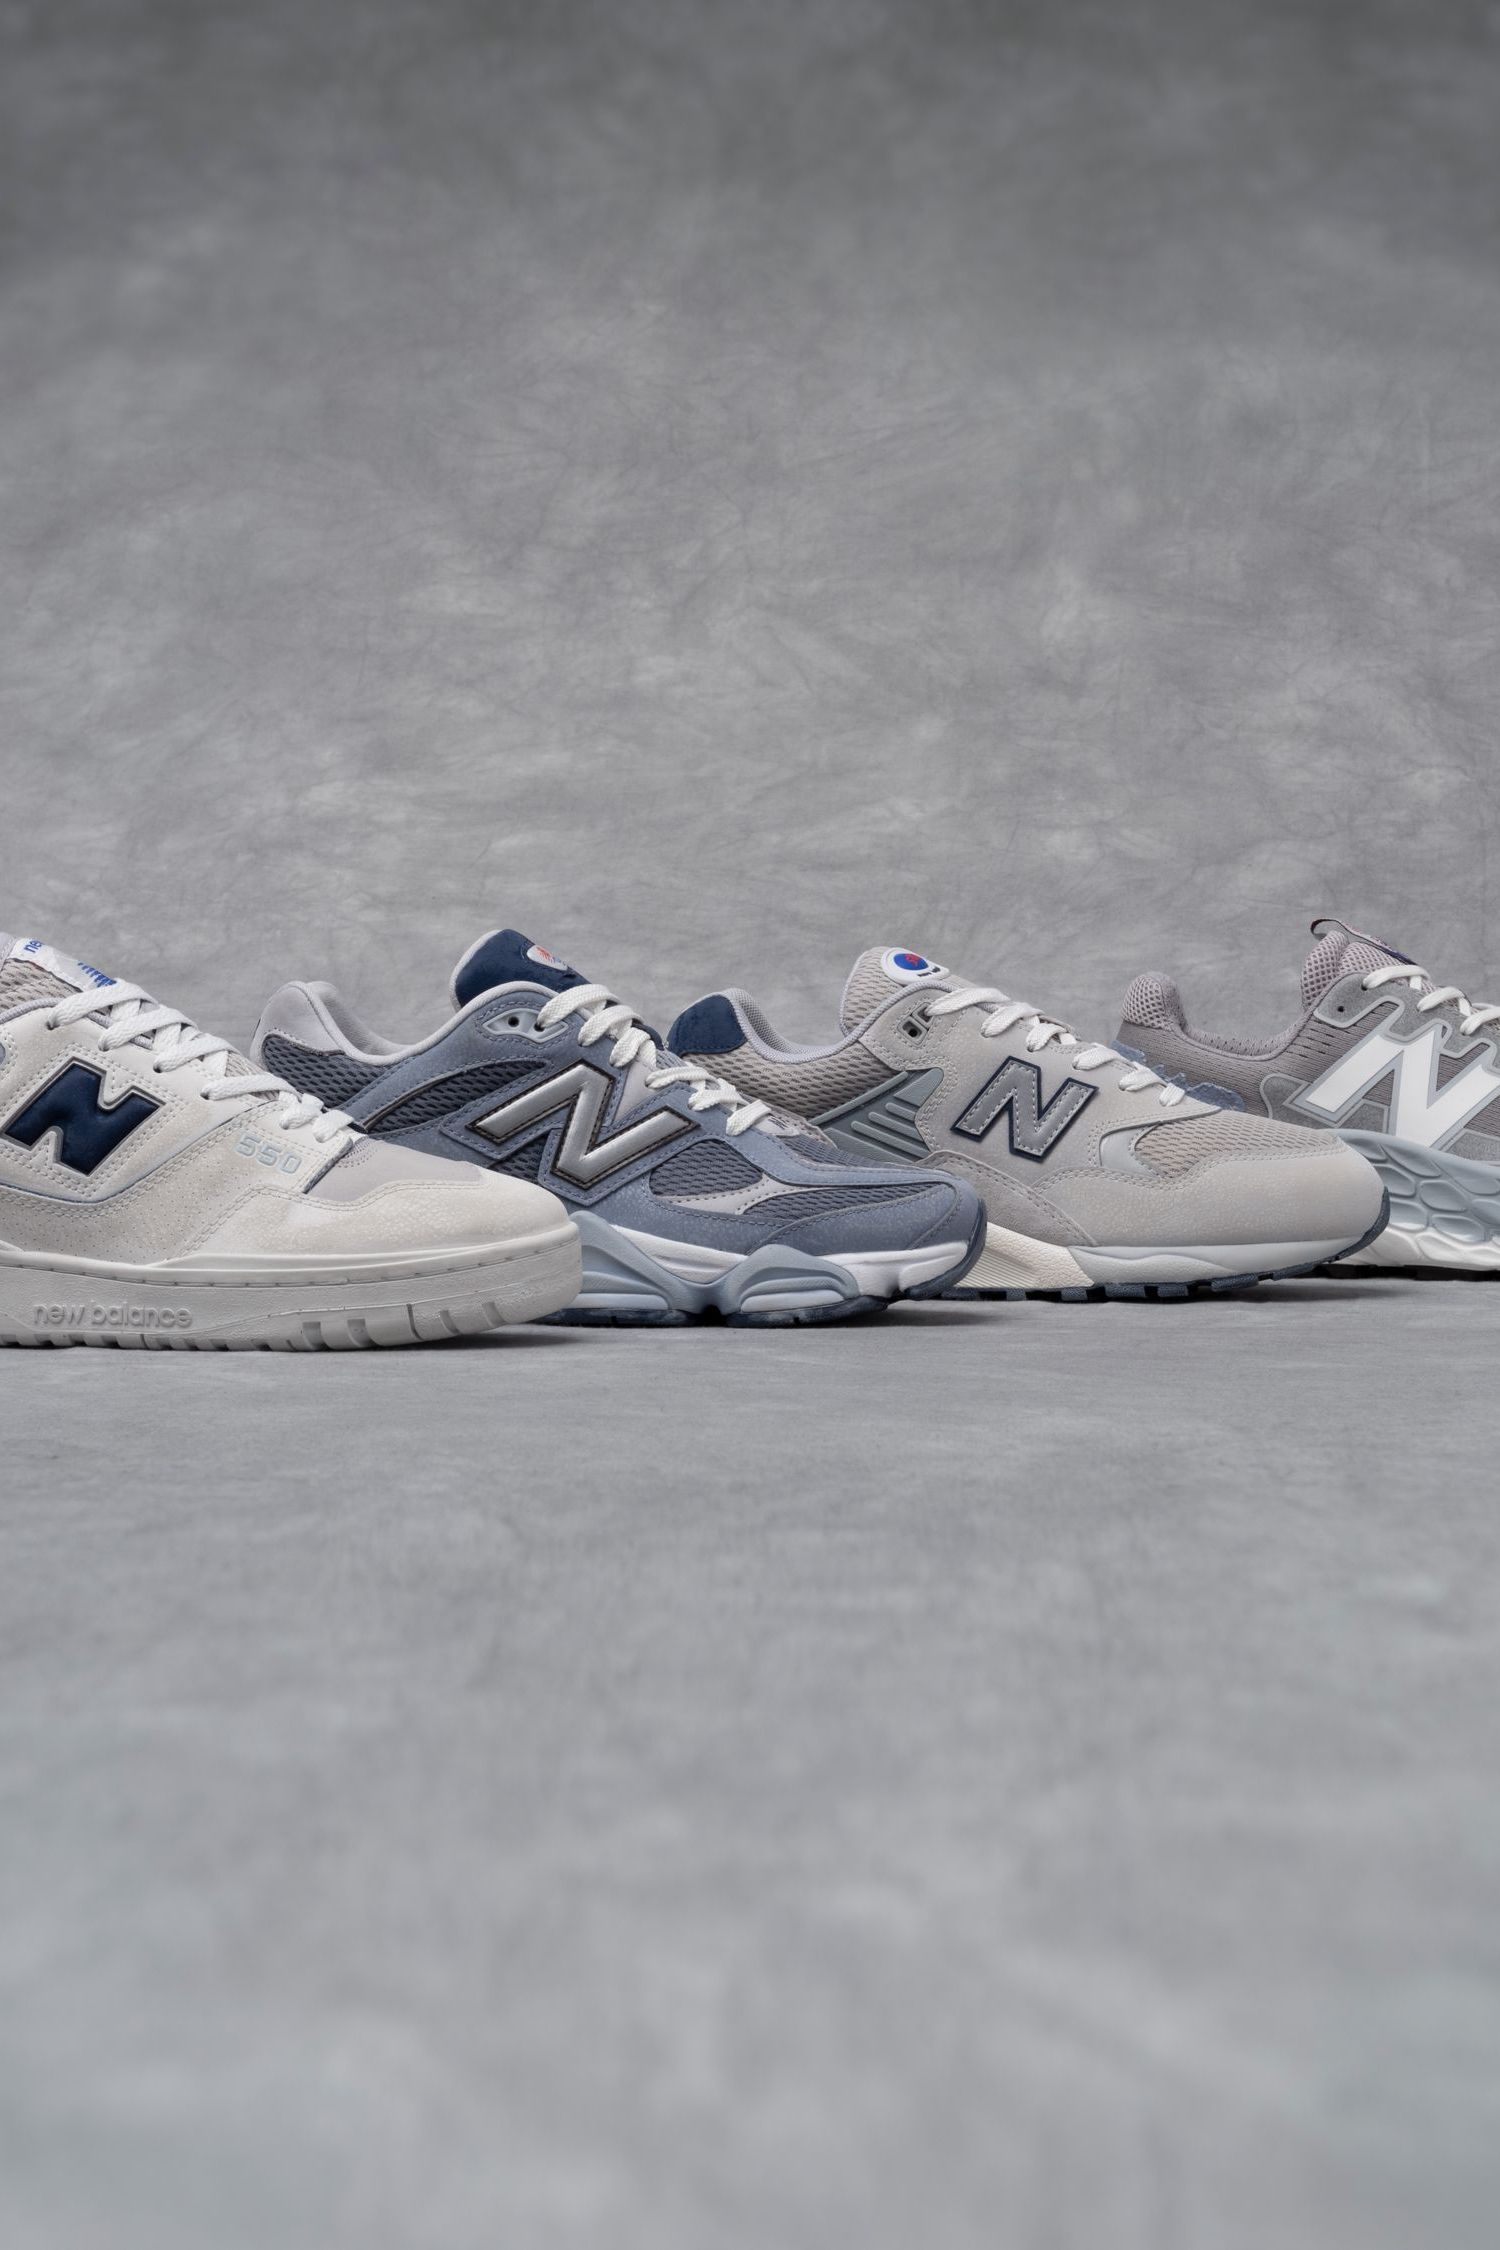 Have you heard about 'Grey Day'? Why New Balance has us